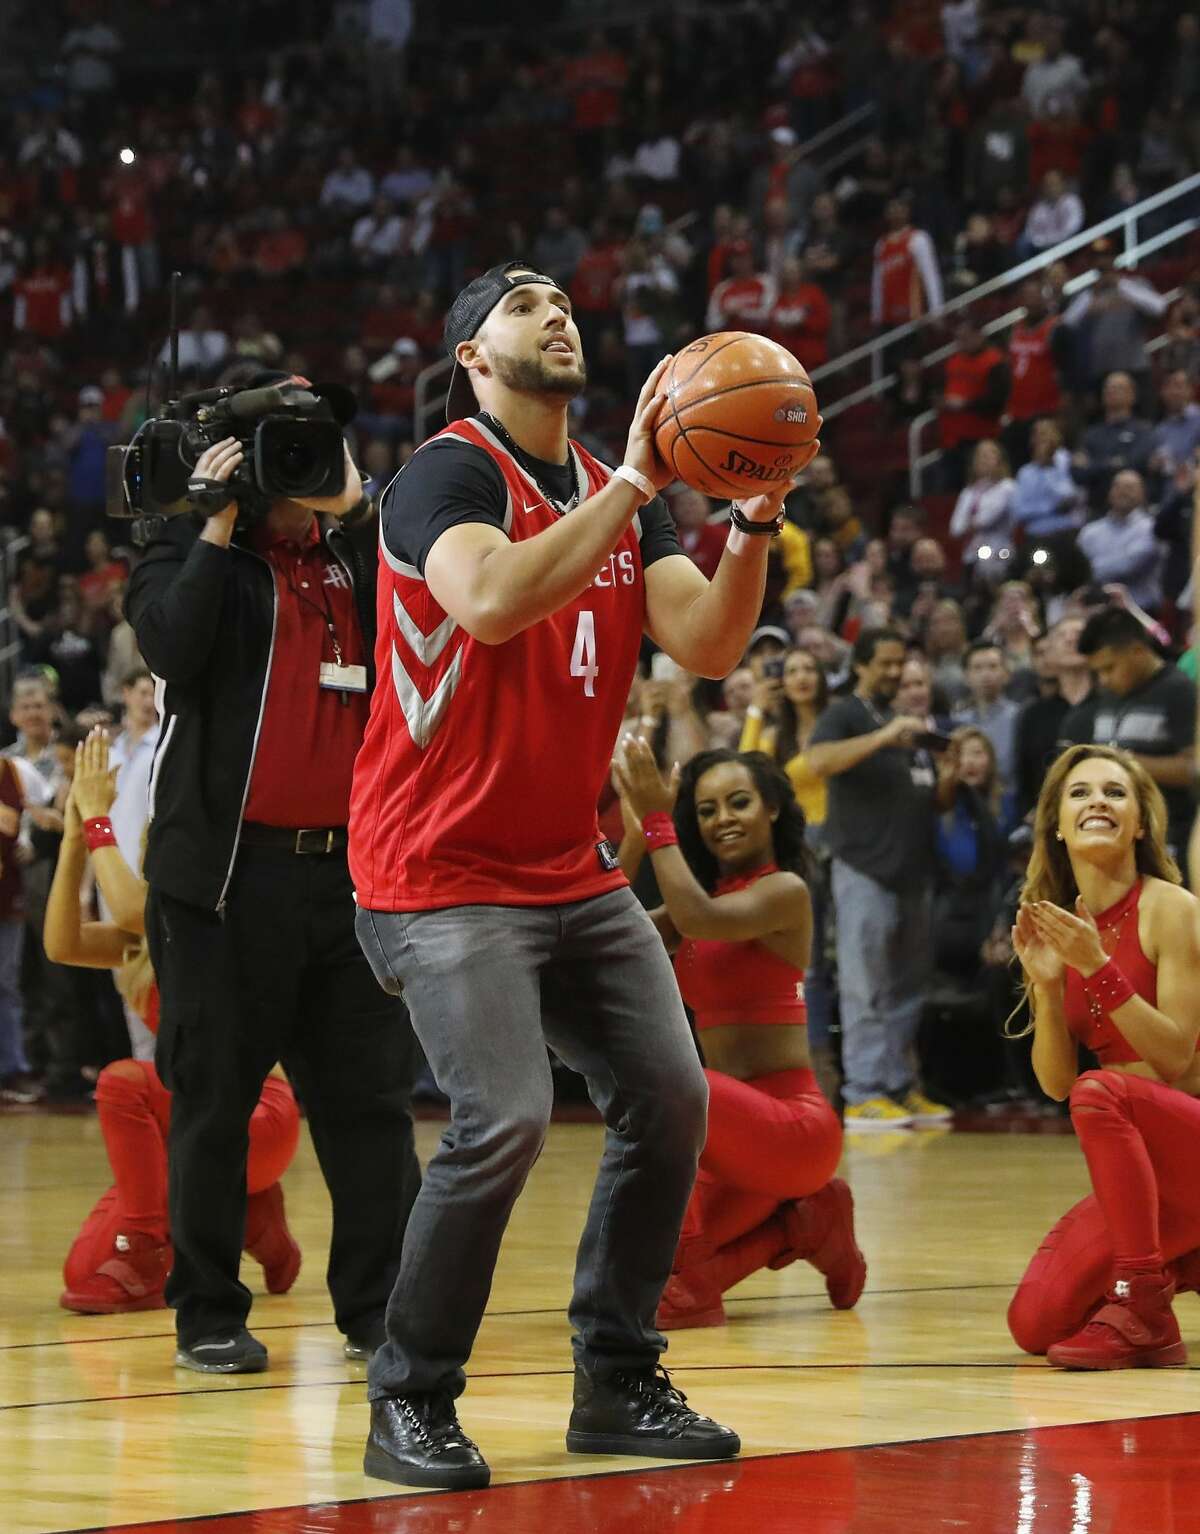 Astros outfielder George Springer has already taken the 'First Shot' at a Rockets game, but will that be enough to help him in the Astros' upcoming Spring Training shooting contest?